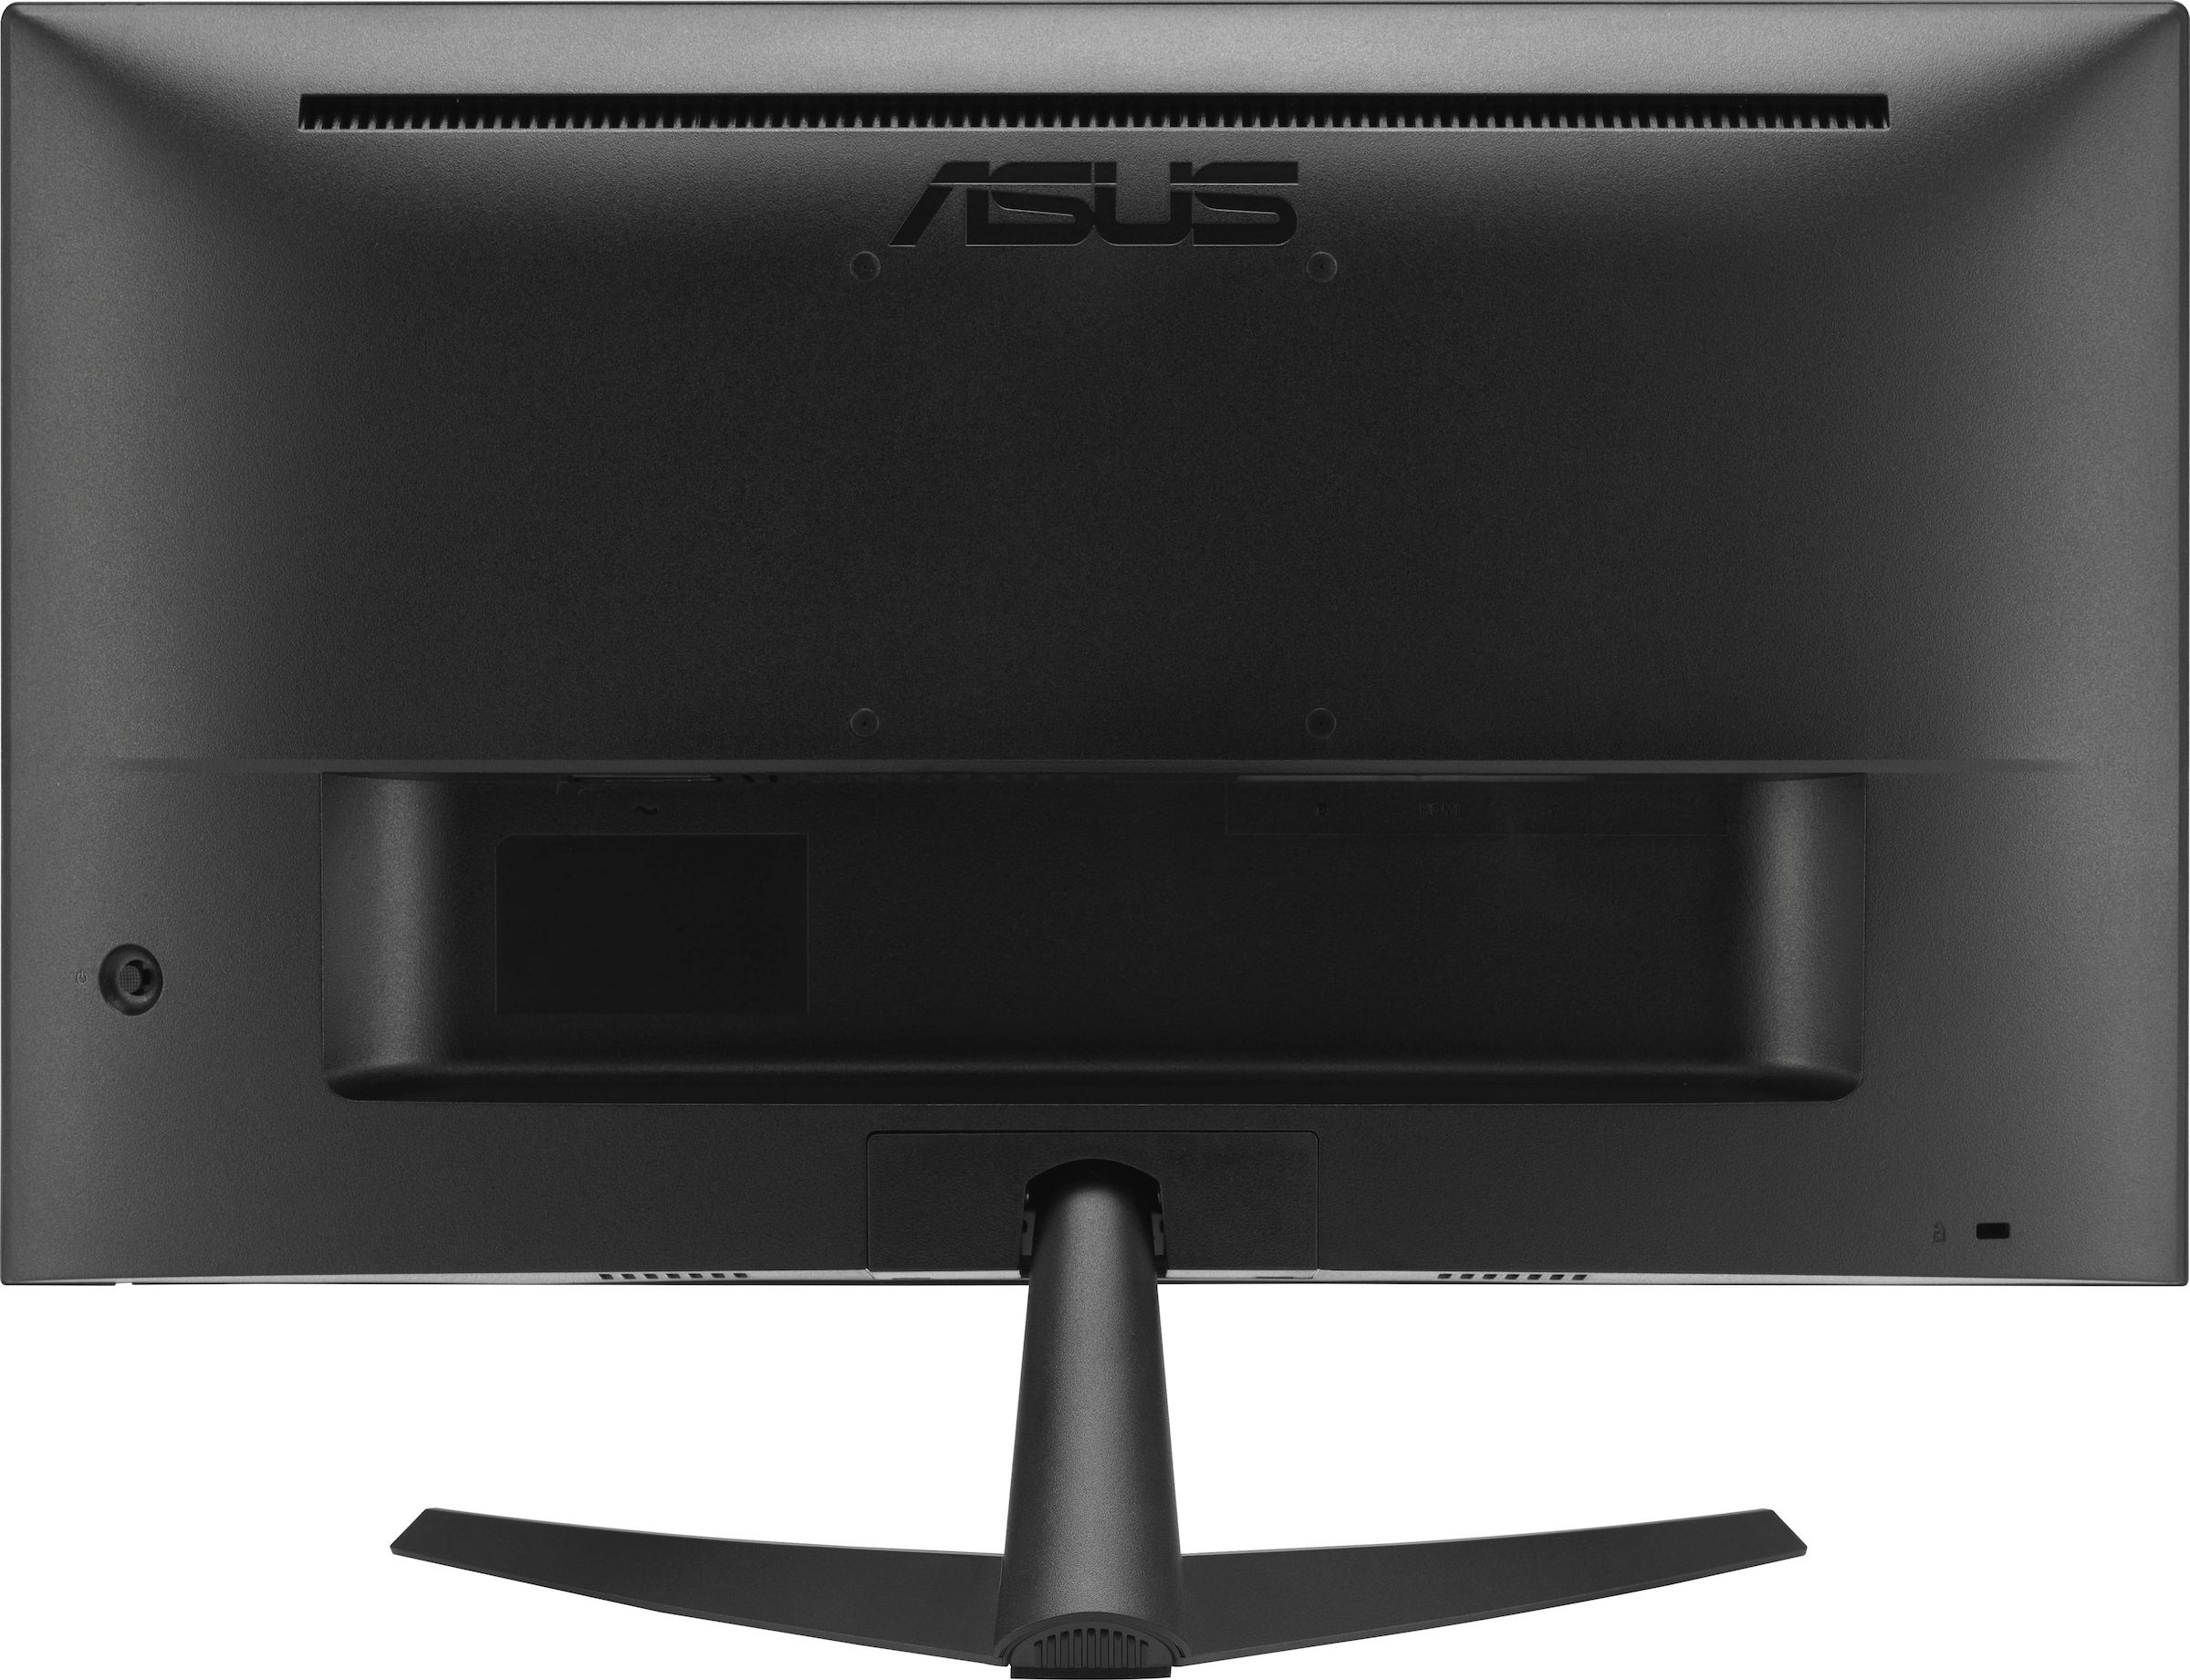 Full 75 cm/22 Asus 55 Zoll, »VY229Q«, online bei LED-Monitor x 1 Hz UNIVERSAL 1080 ms 1920 HD, px, Reaktionszeit,